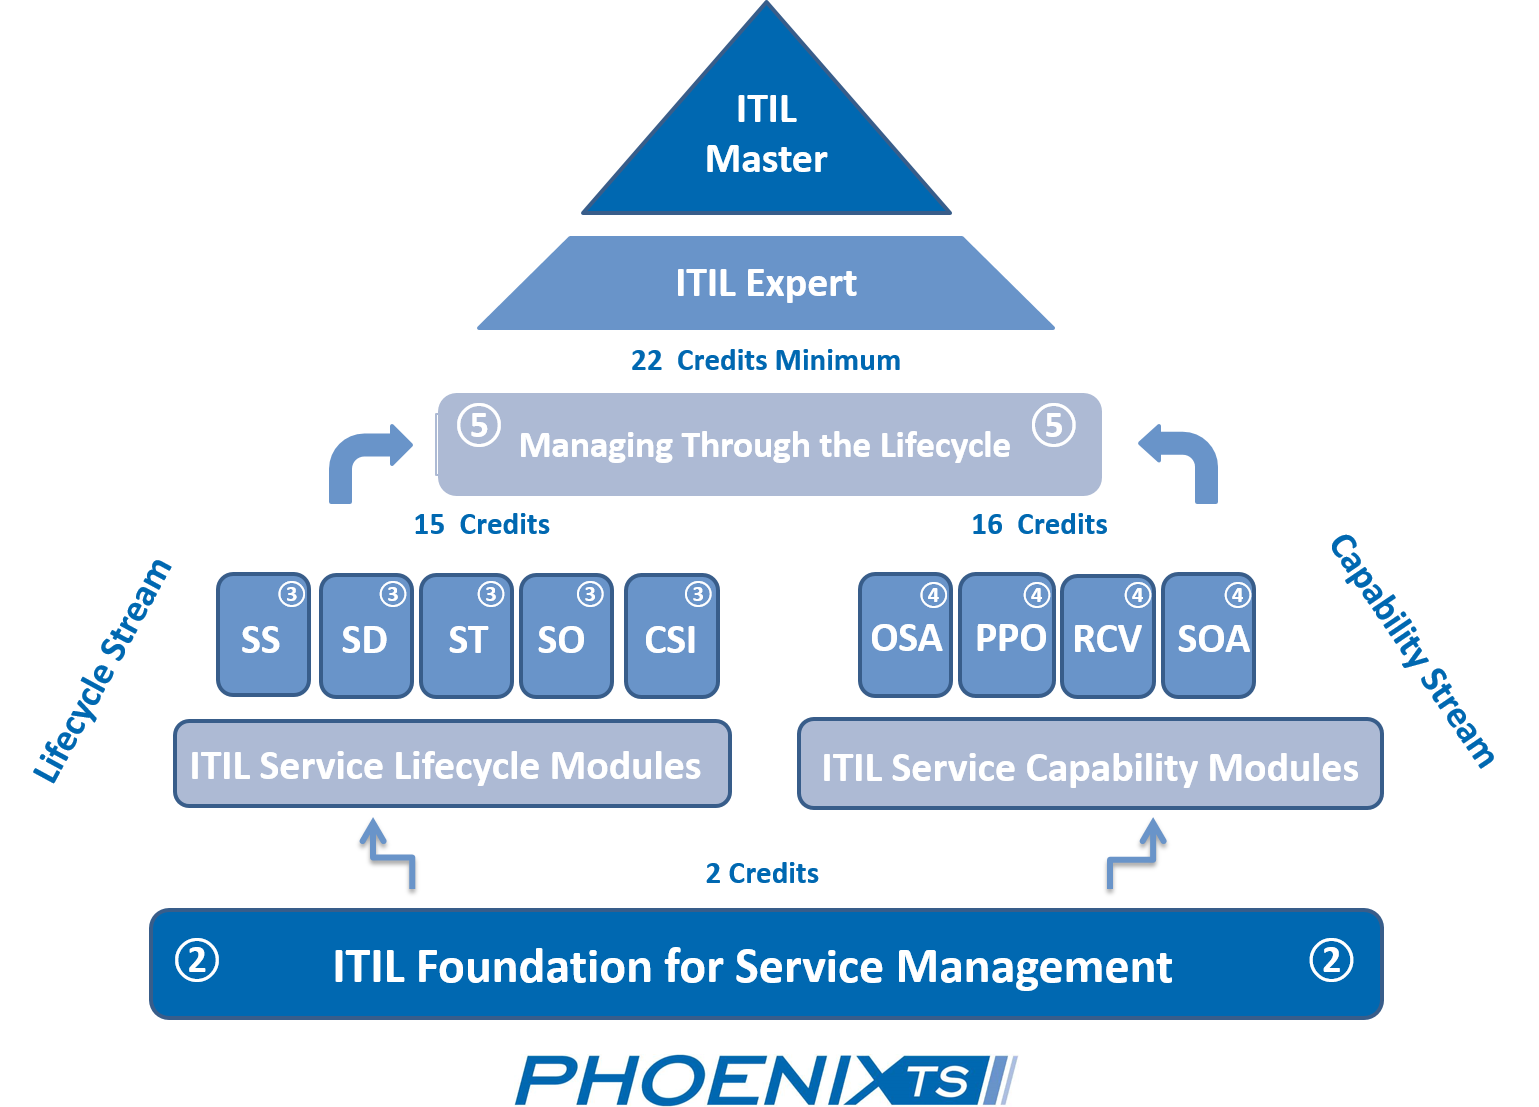 ITIL Certification Path